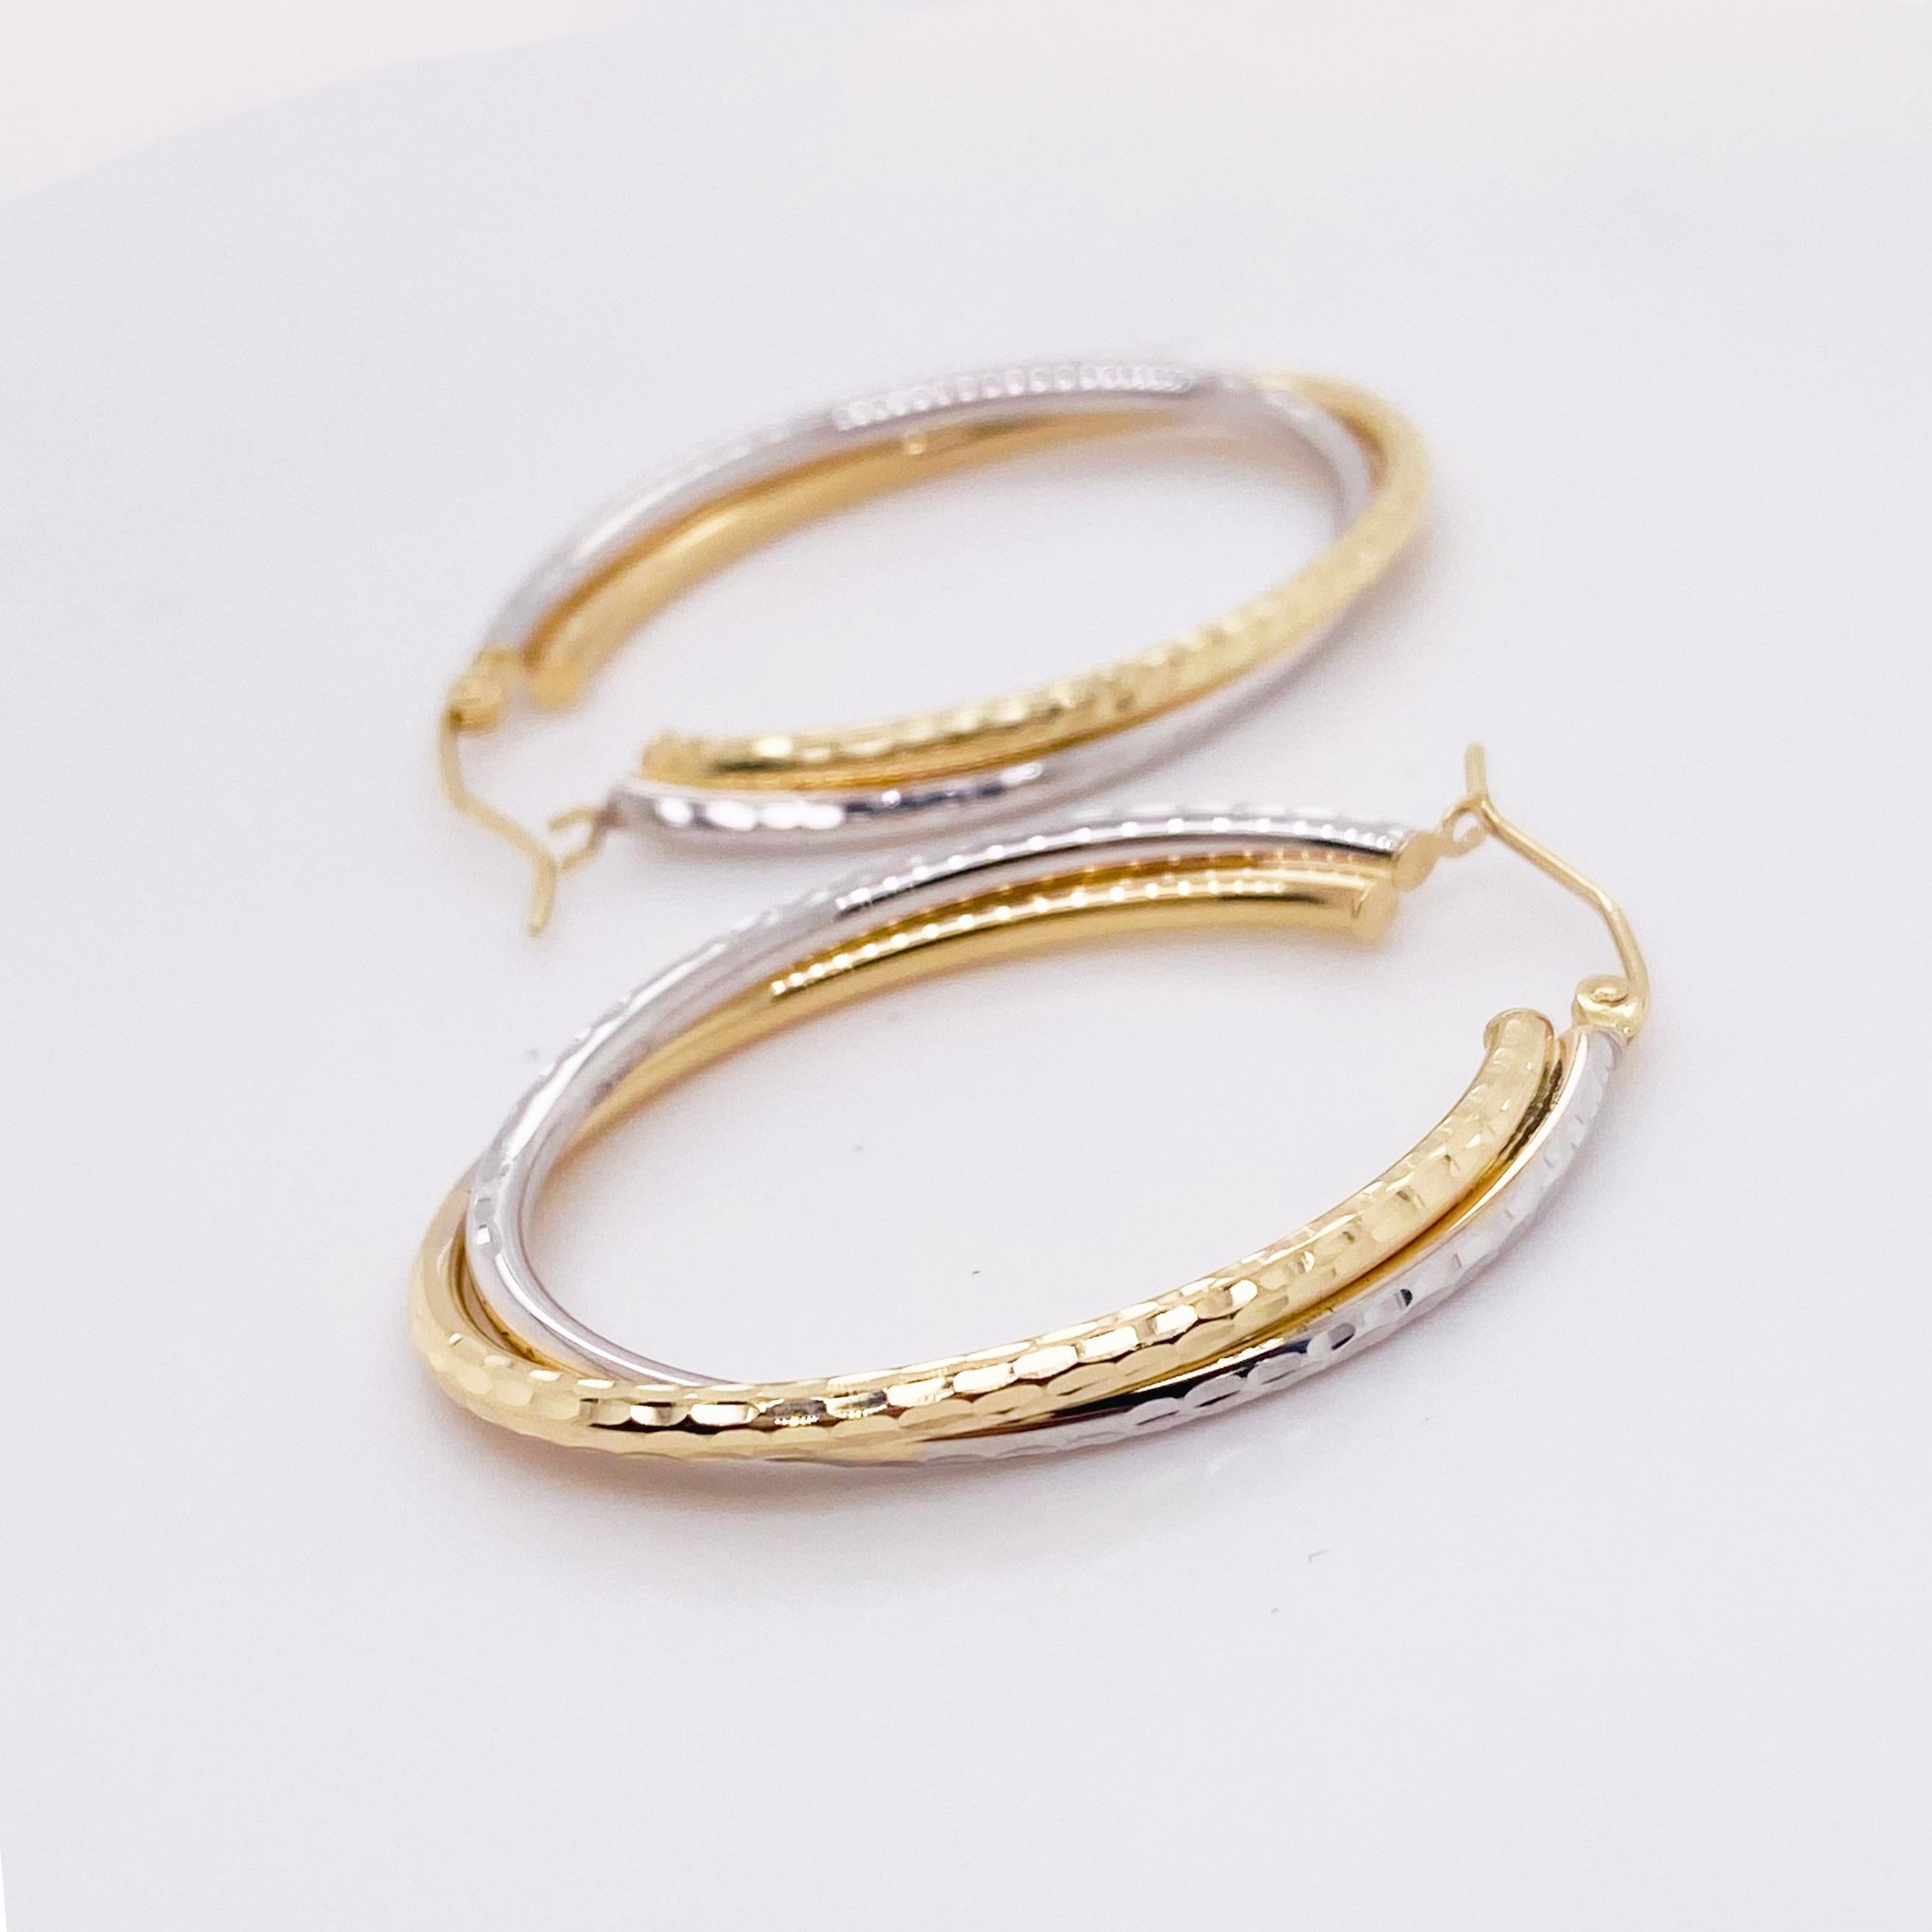 The details for these gorgeous earrings are listed below:
1 Set
Metal Quality: 14K Yellow and White Gold
Earring Type: Hoop
Earring Length: 4 cm
Earring Width: 4.06 mm
Post Type: Hinge